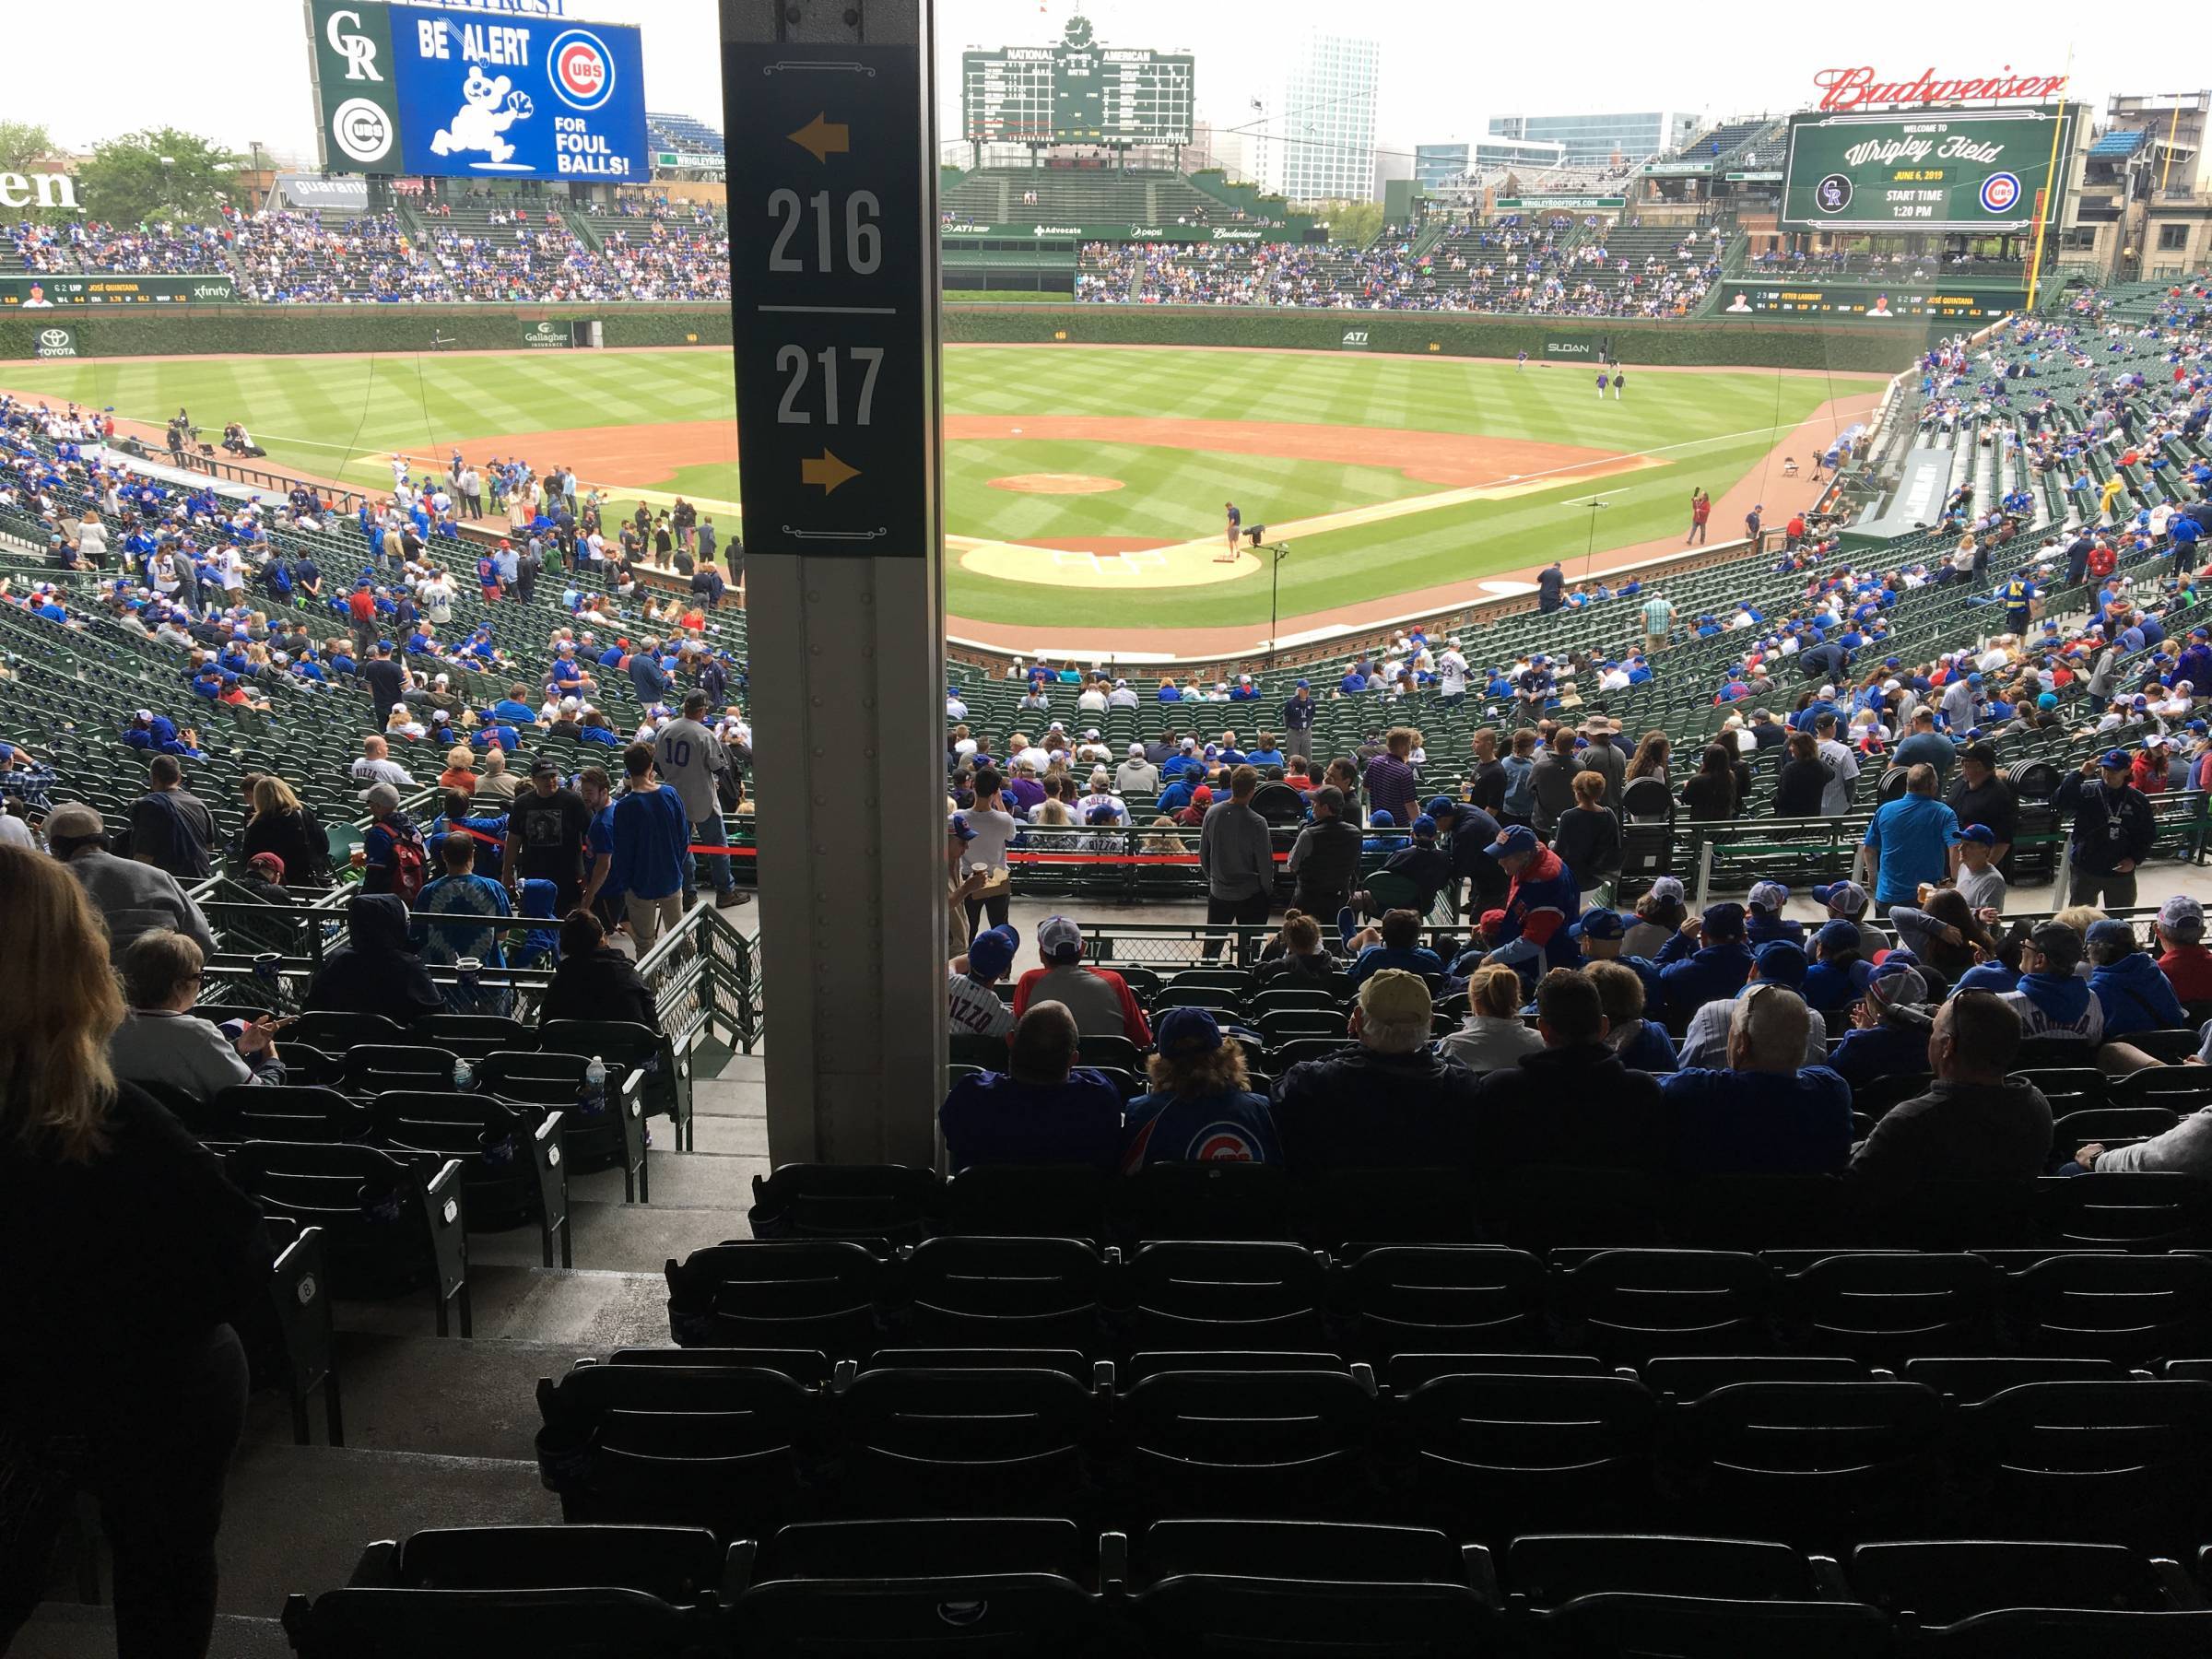 Pole in Section 217 at Wrigley Field